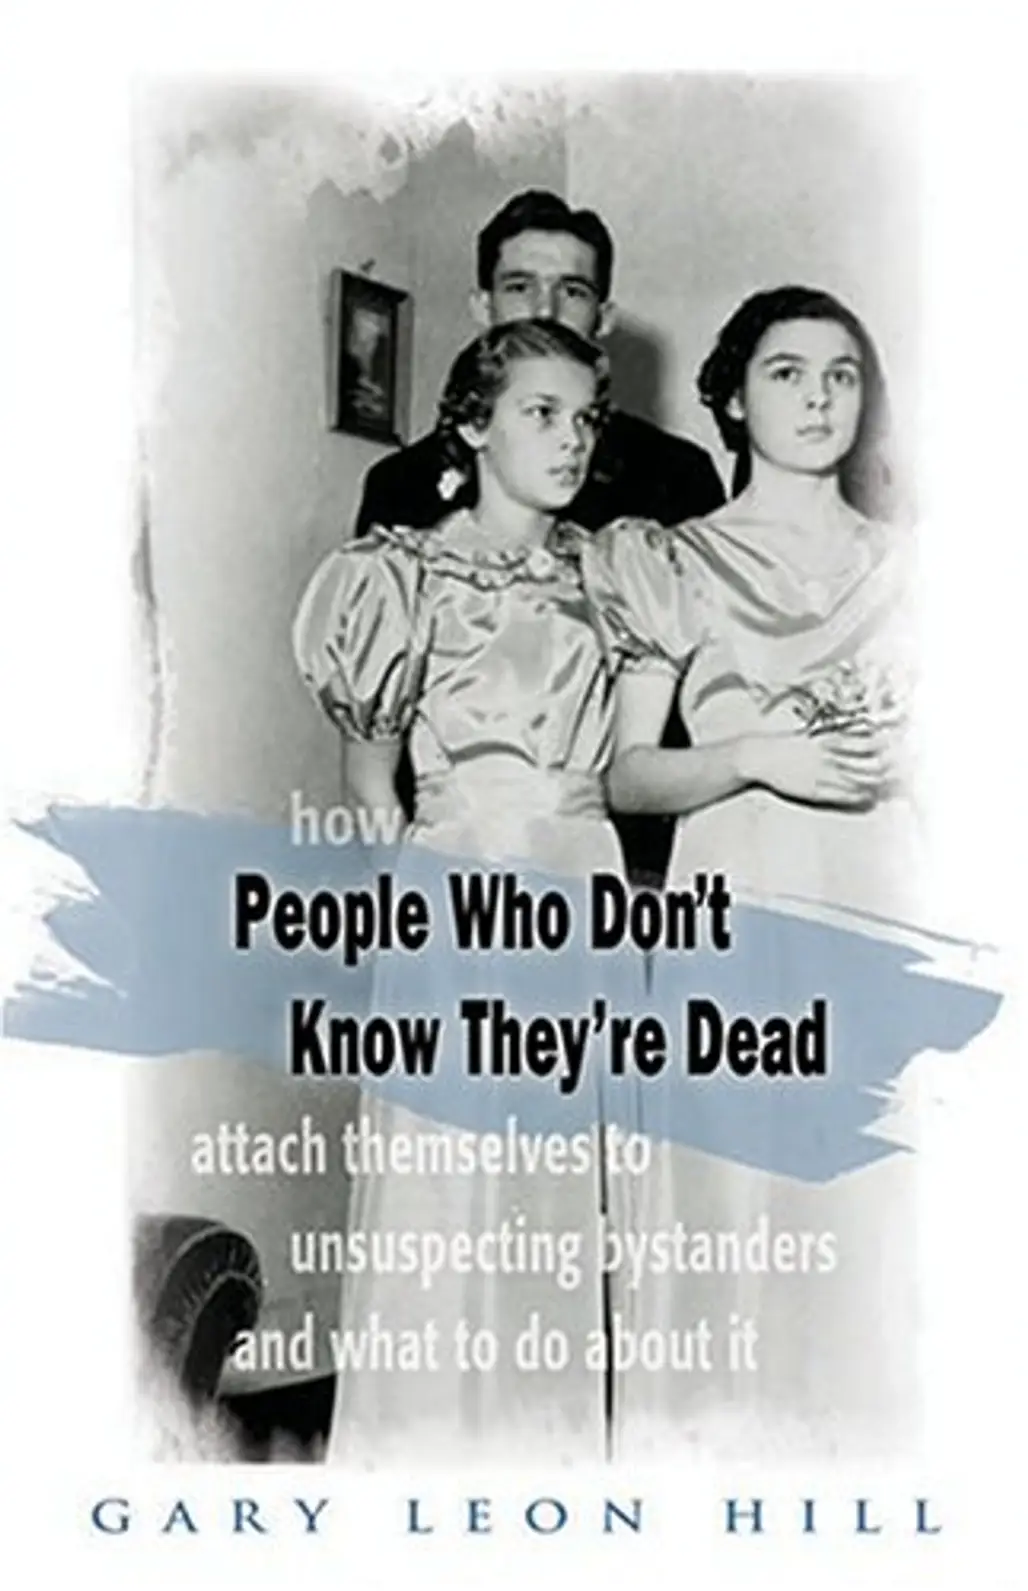 People Who Don't Know They're Dead: How They Attach Themselves to Unsuspecting Bystanders and What to do about It by Gary Leon Hill